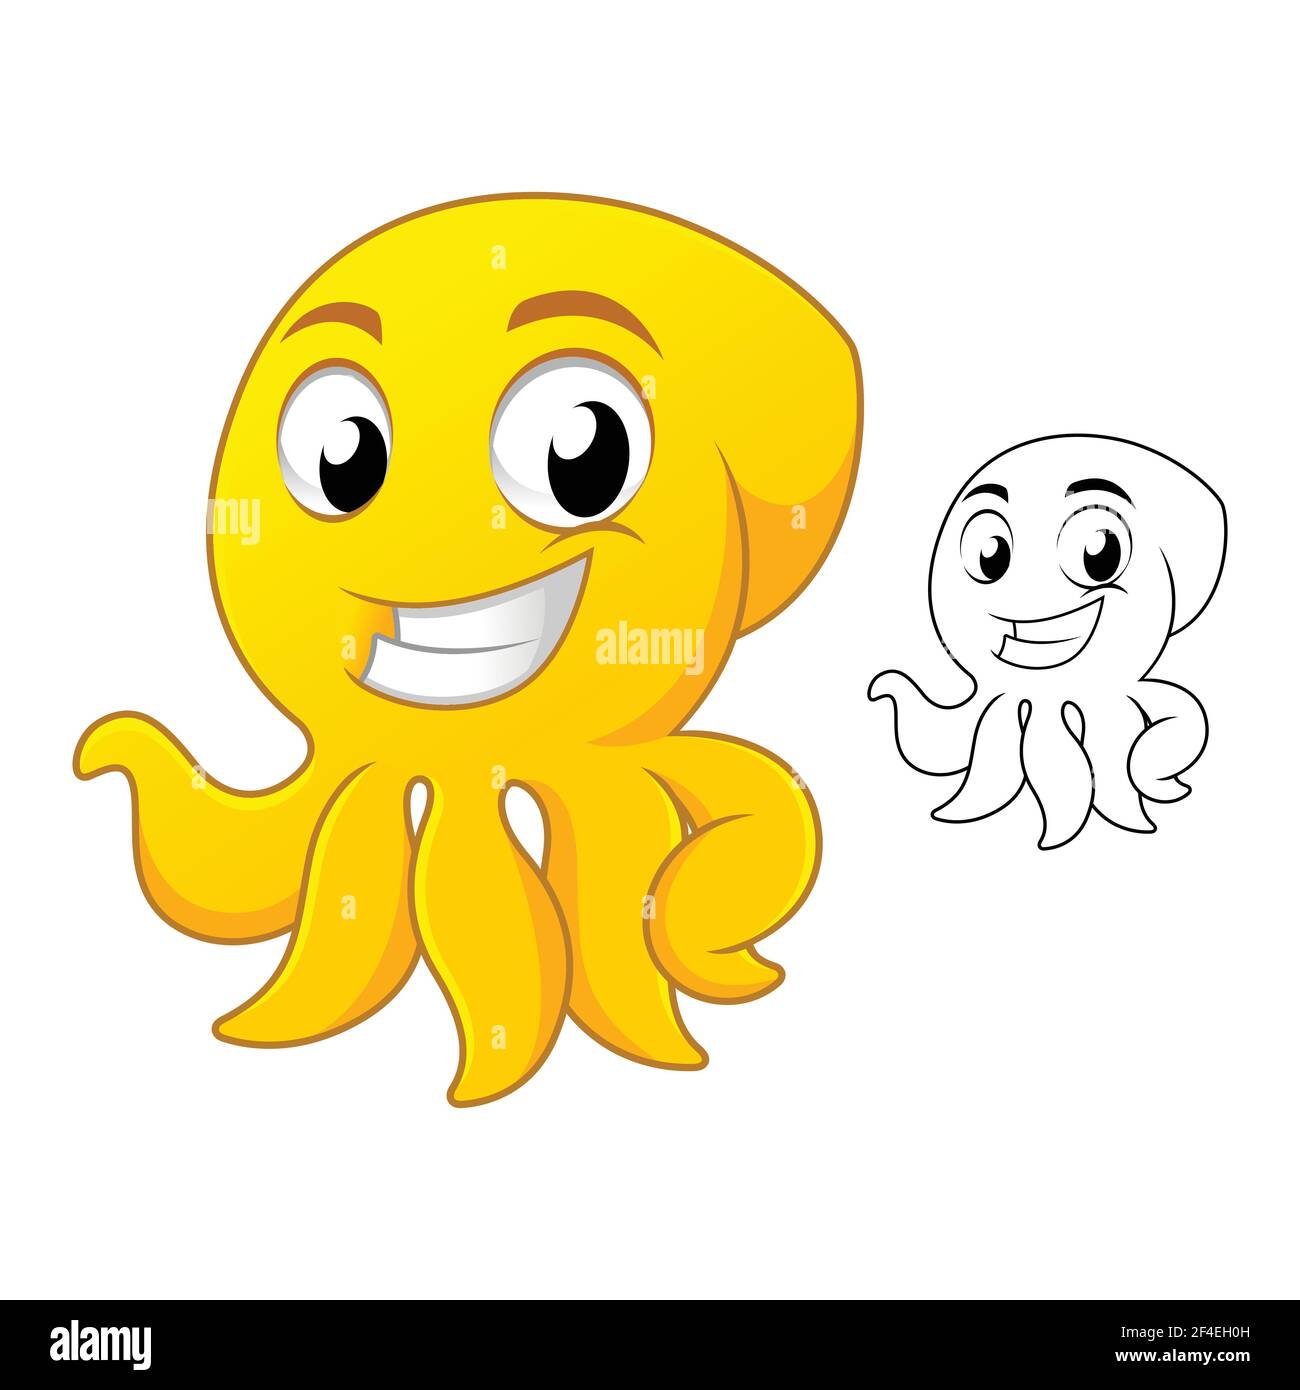 Premium Vector  Cute mascot for octopus shaped flying rocket that